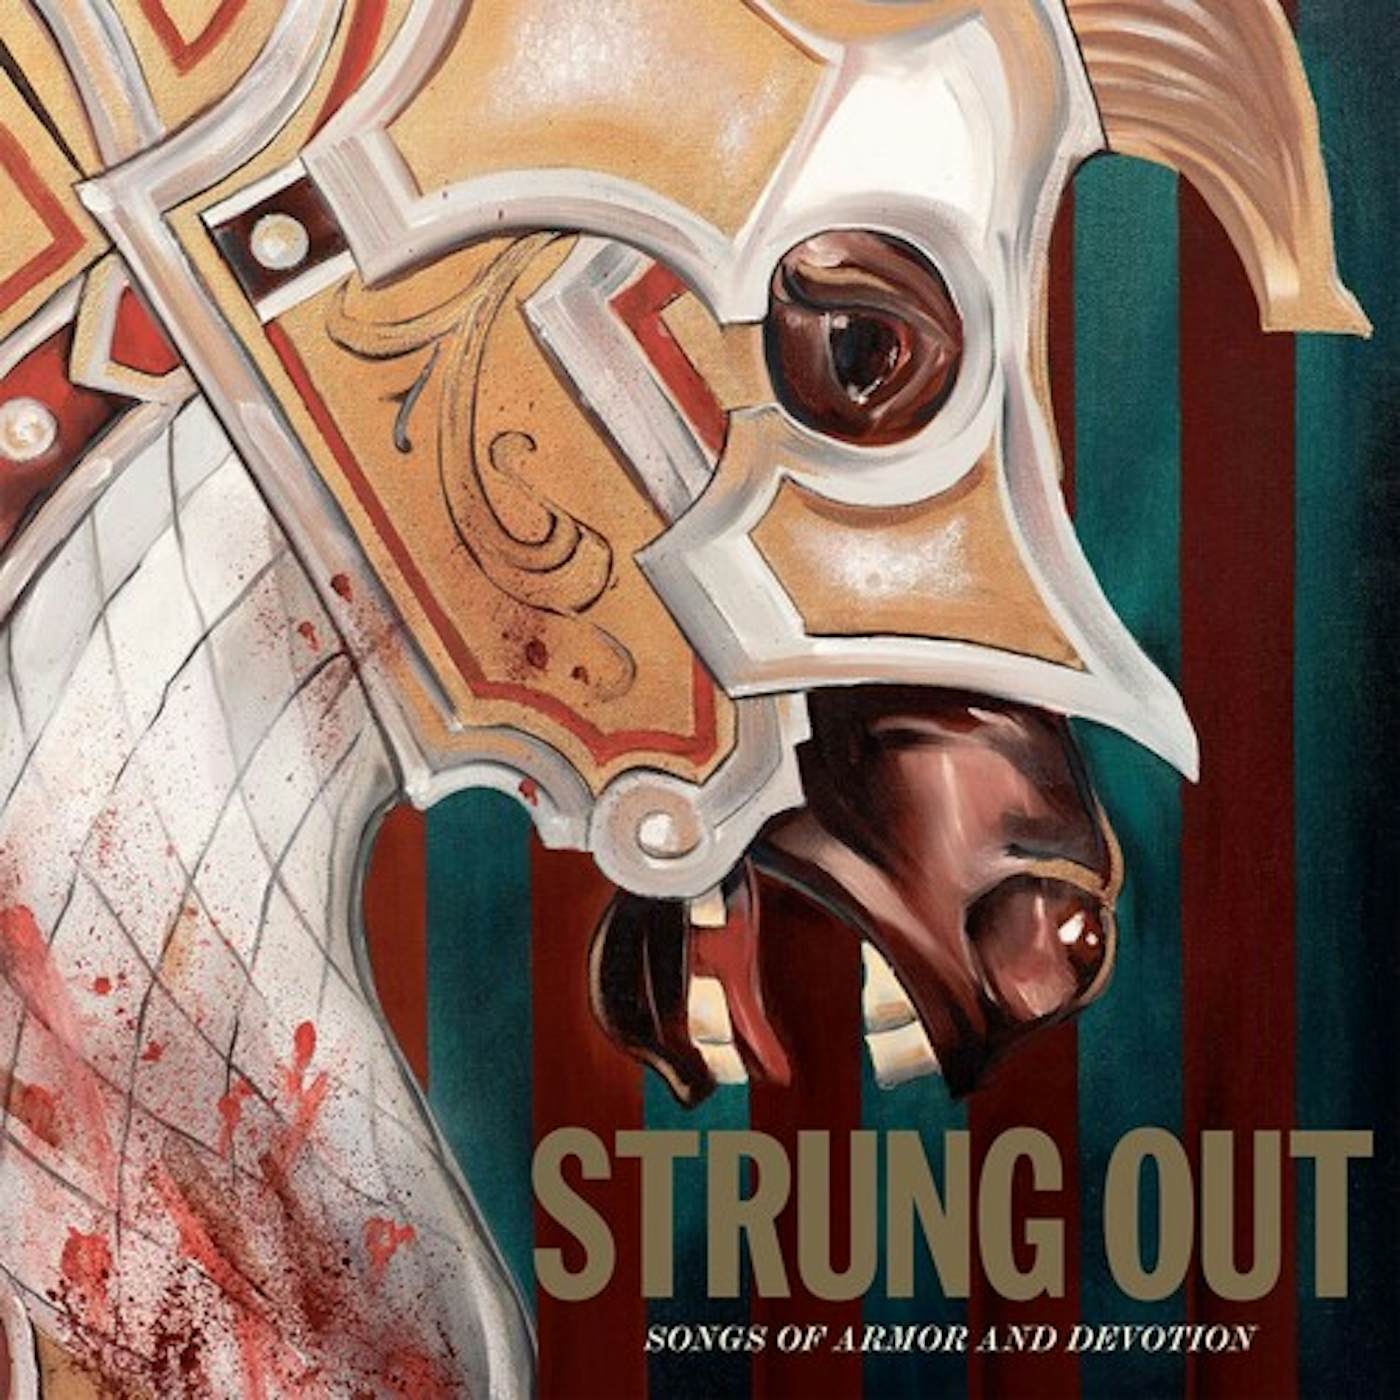 Strung Out Songs of Armor and Devotion Vinyl Record